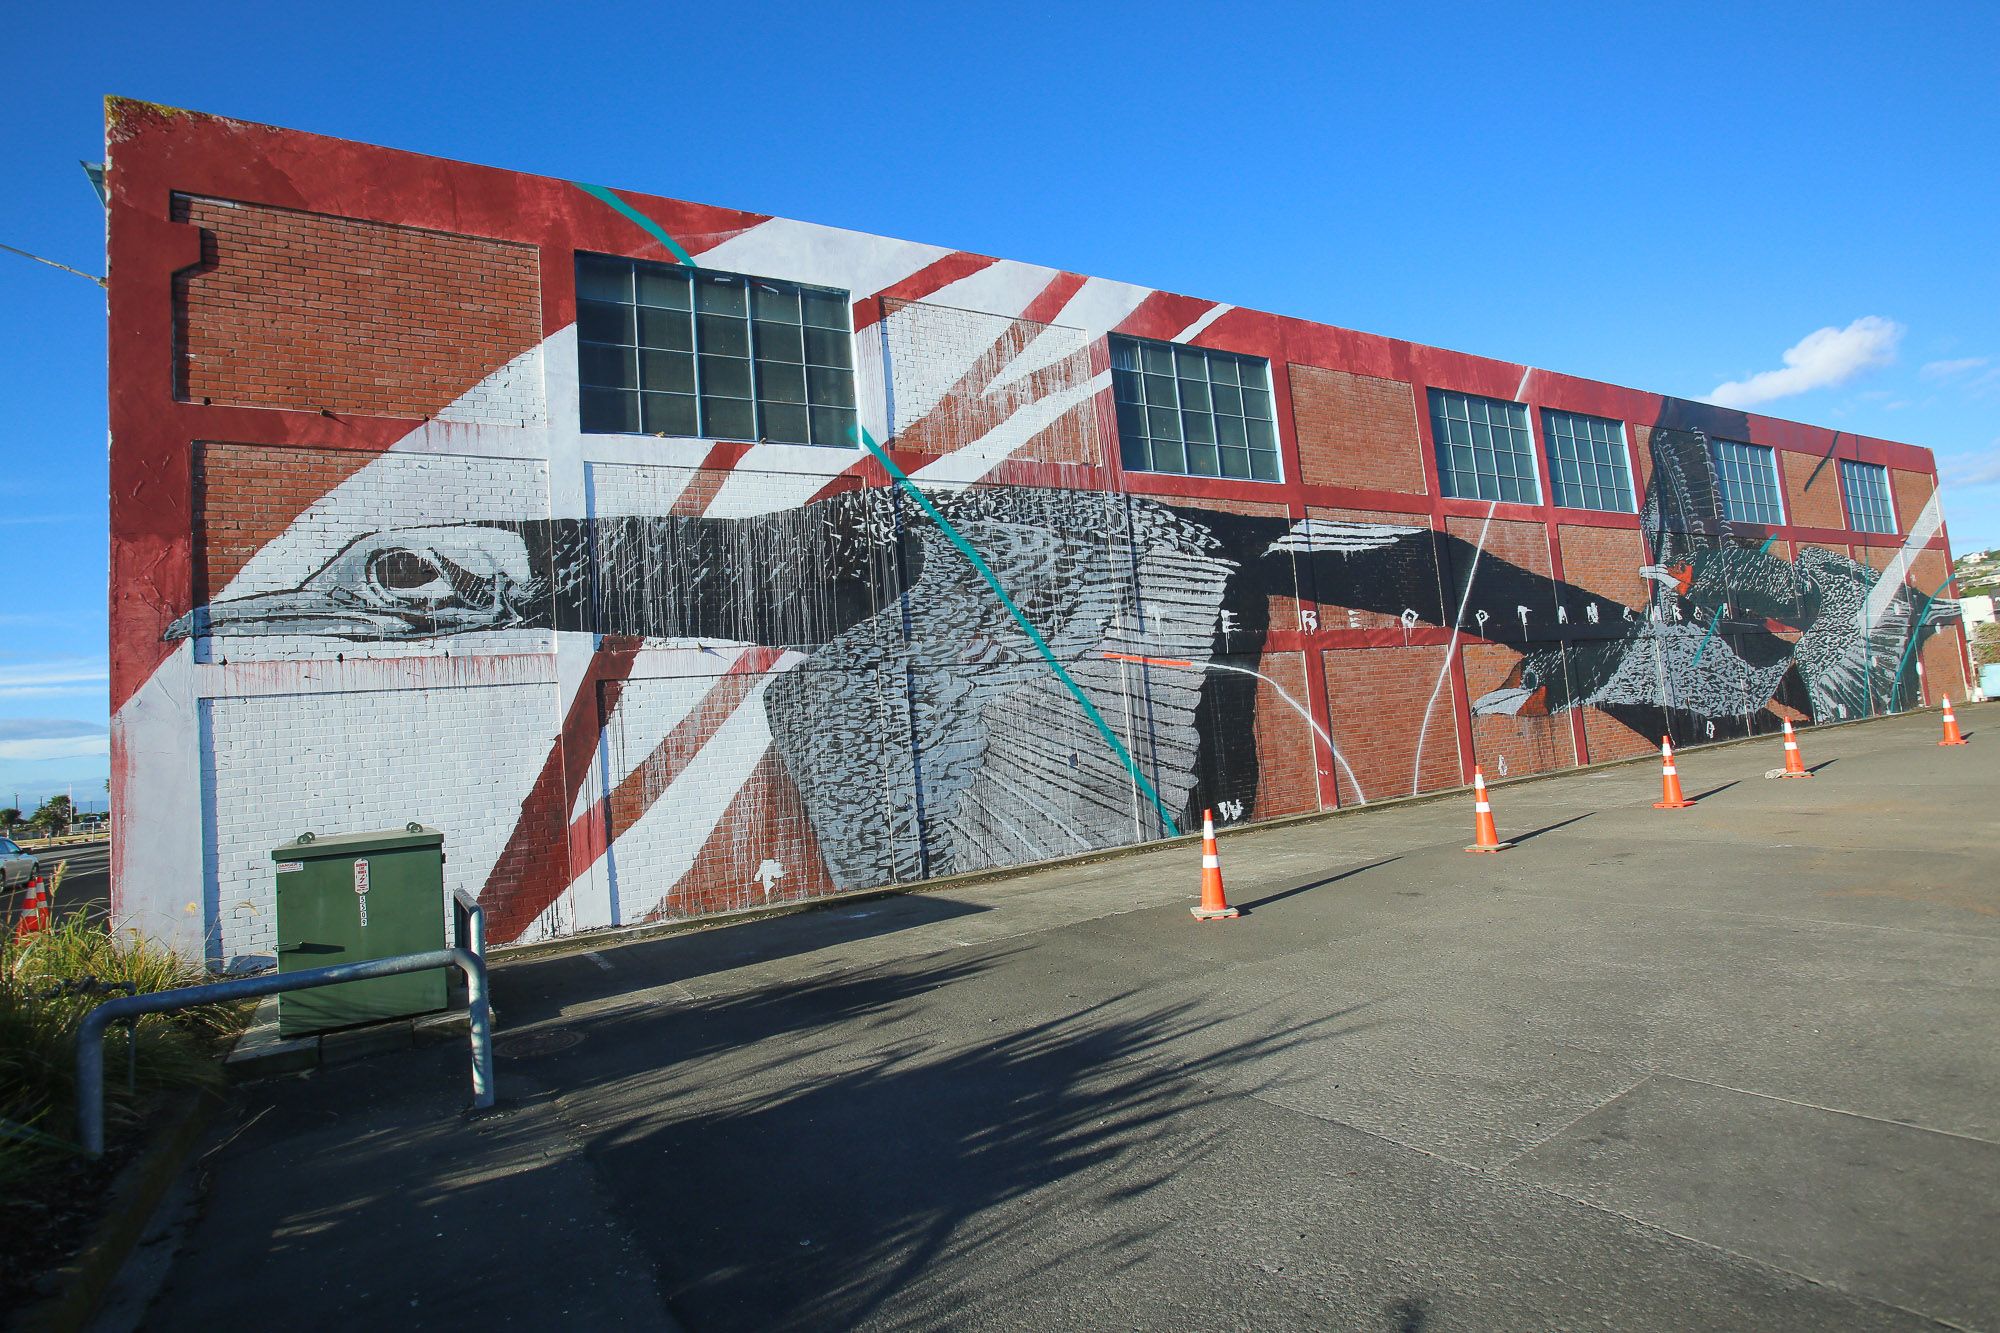 Te waha o Tane (Call of Nature) mural by Twoone in Napier, New Zealand